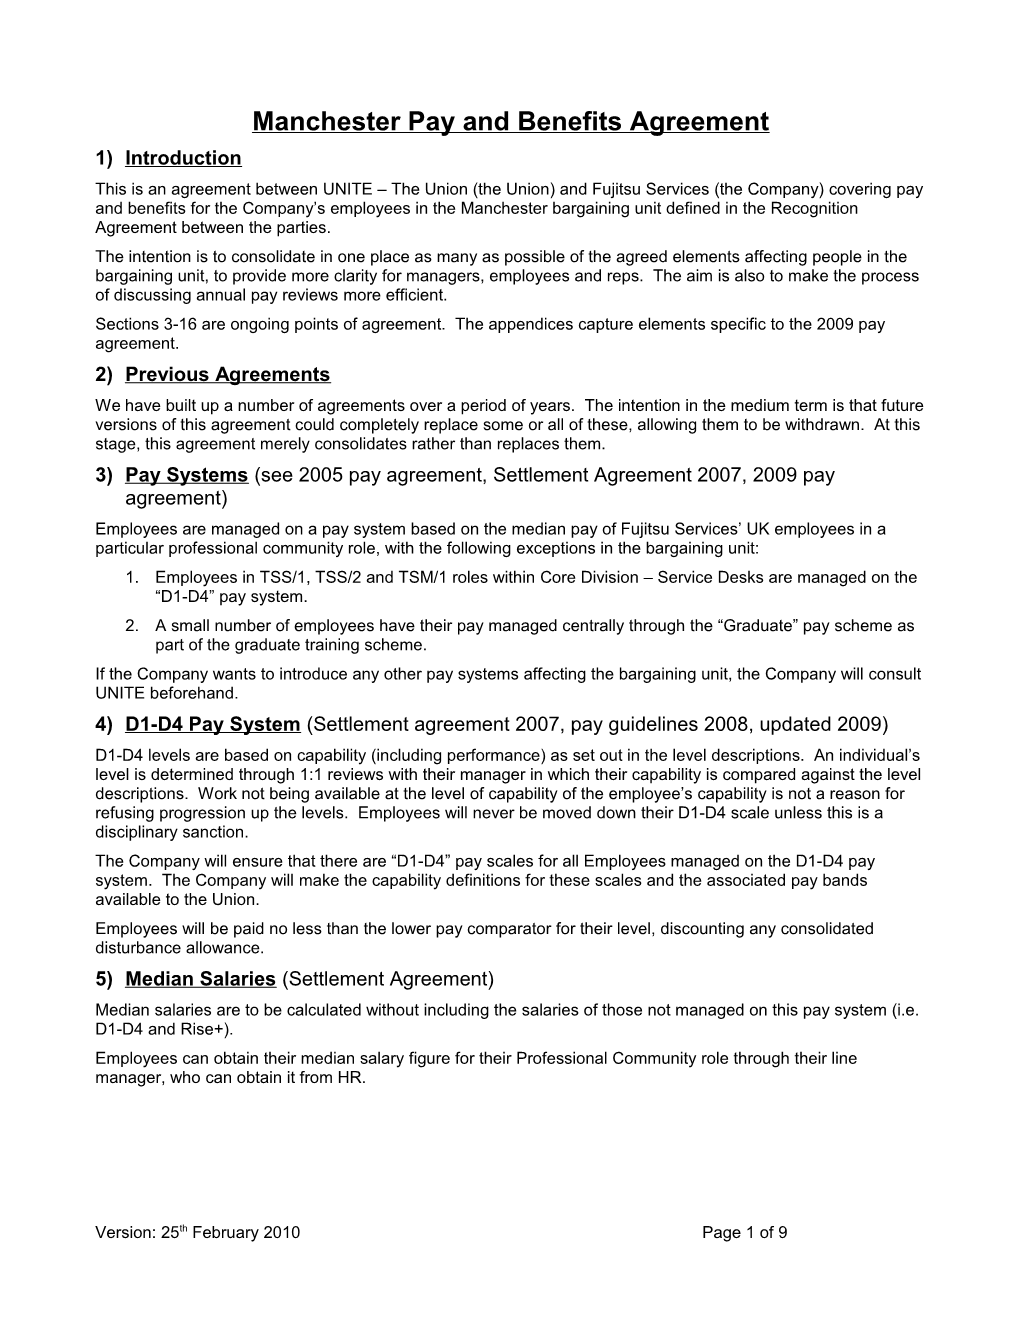 DRAFT Manchester Pay and Benefits Agreement